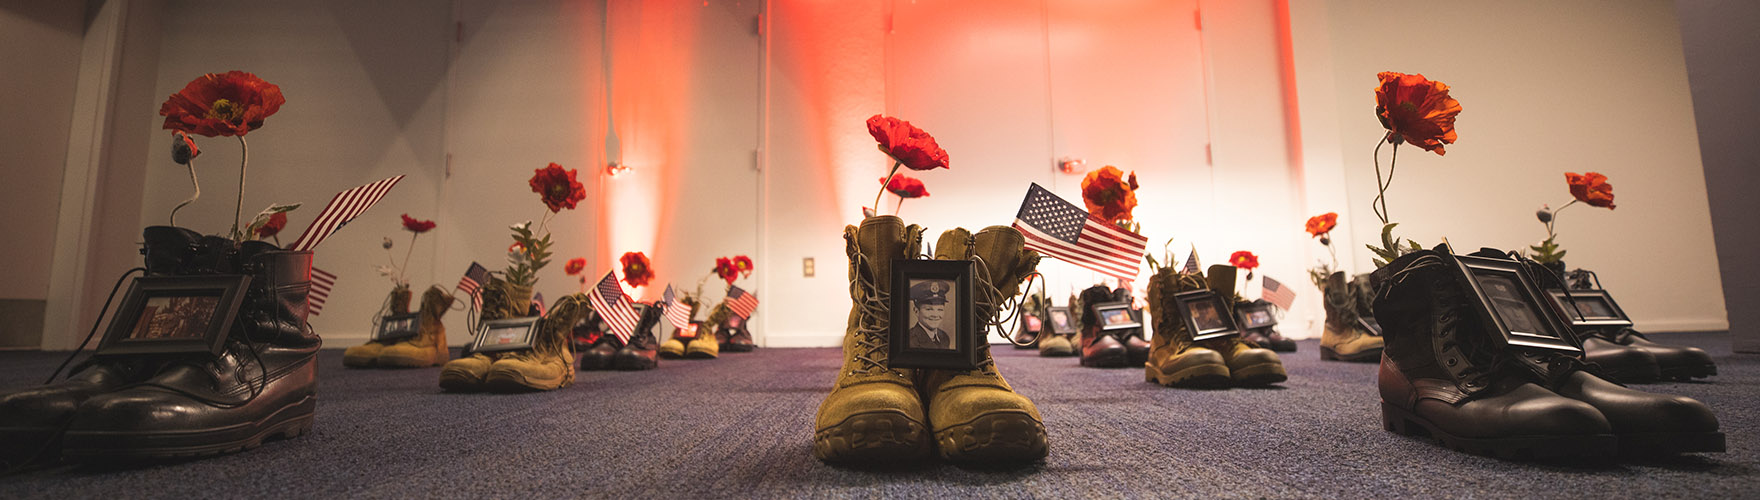 A Memorial Day display of boots, photos, and flowers honors those lost.